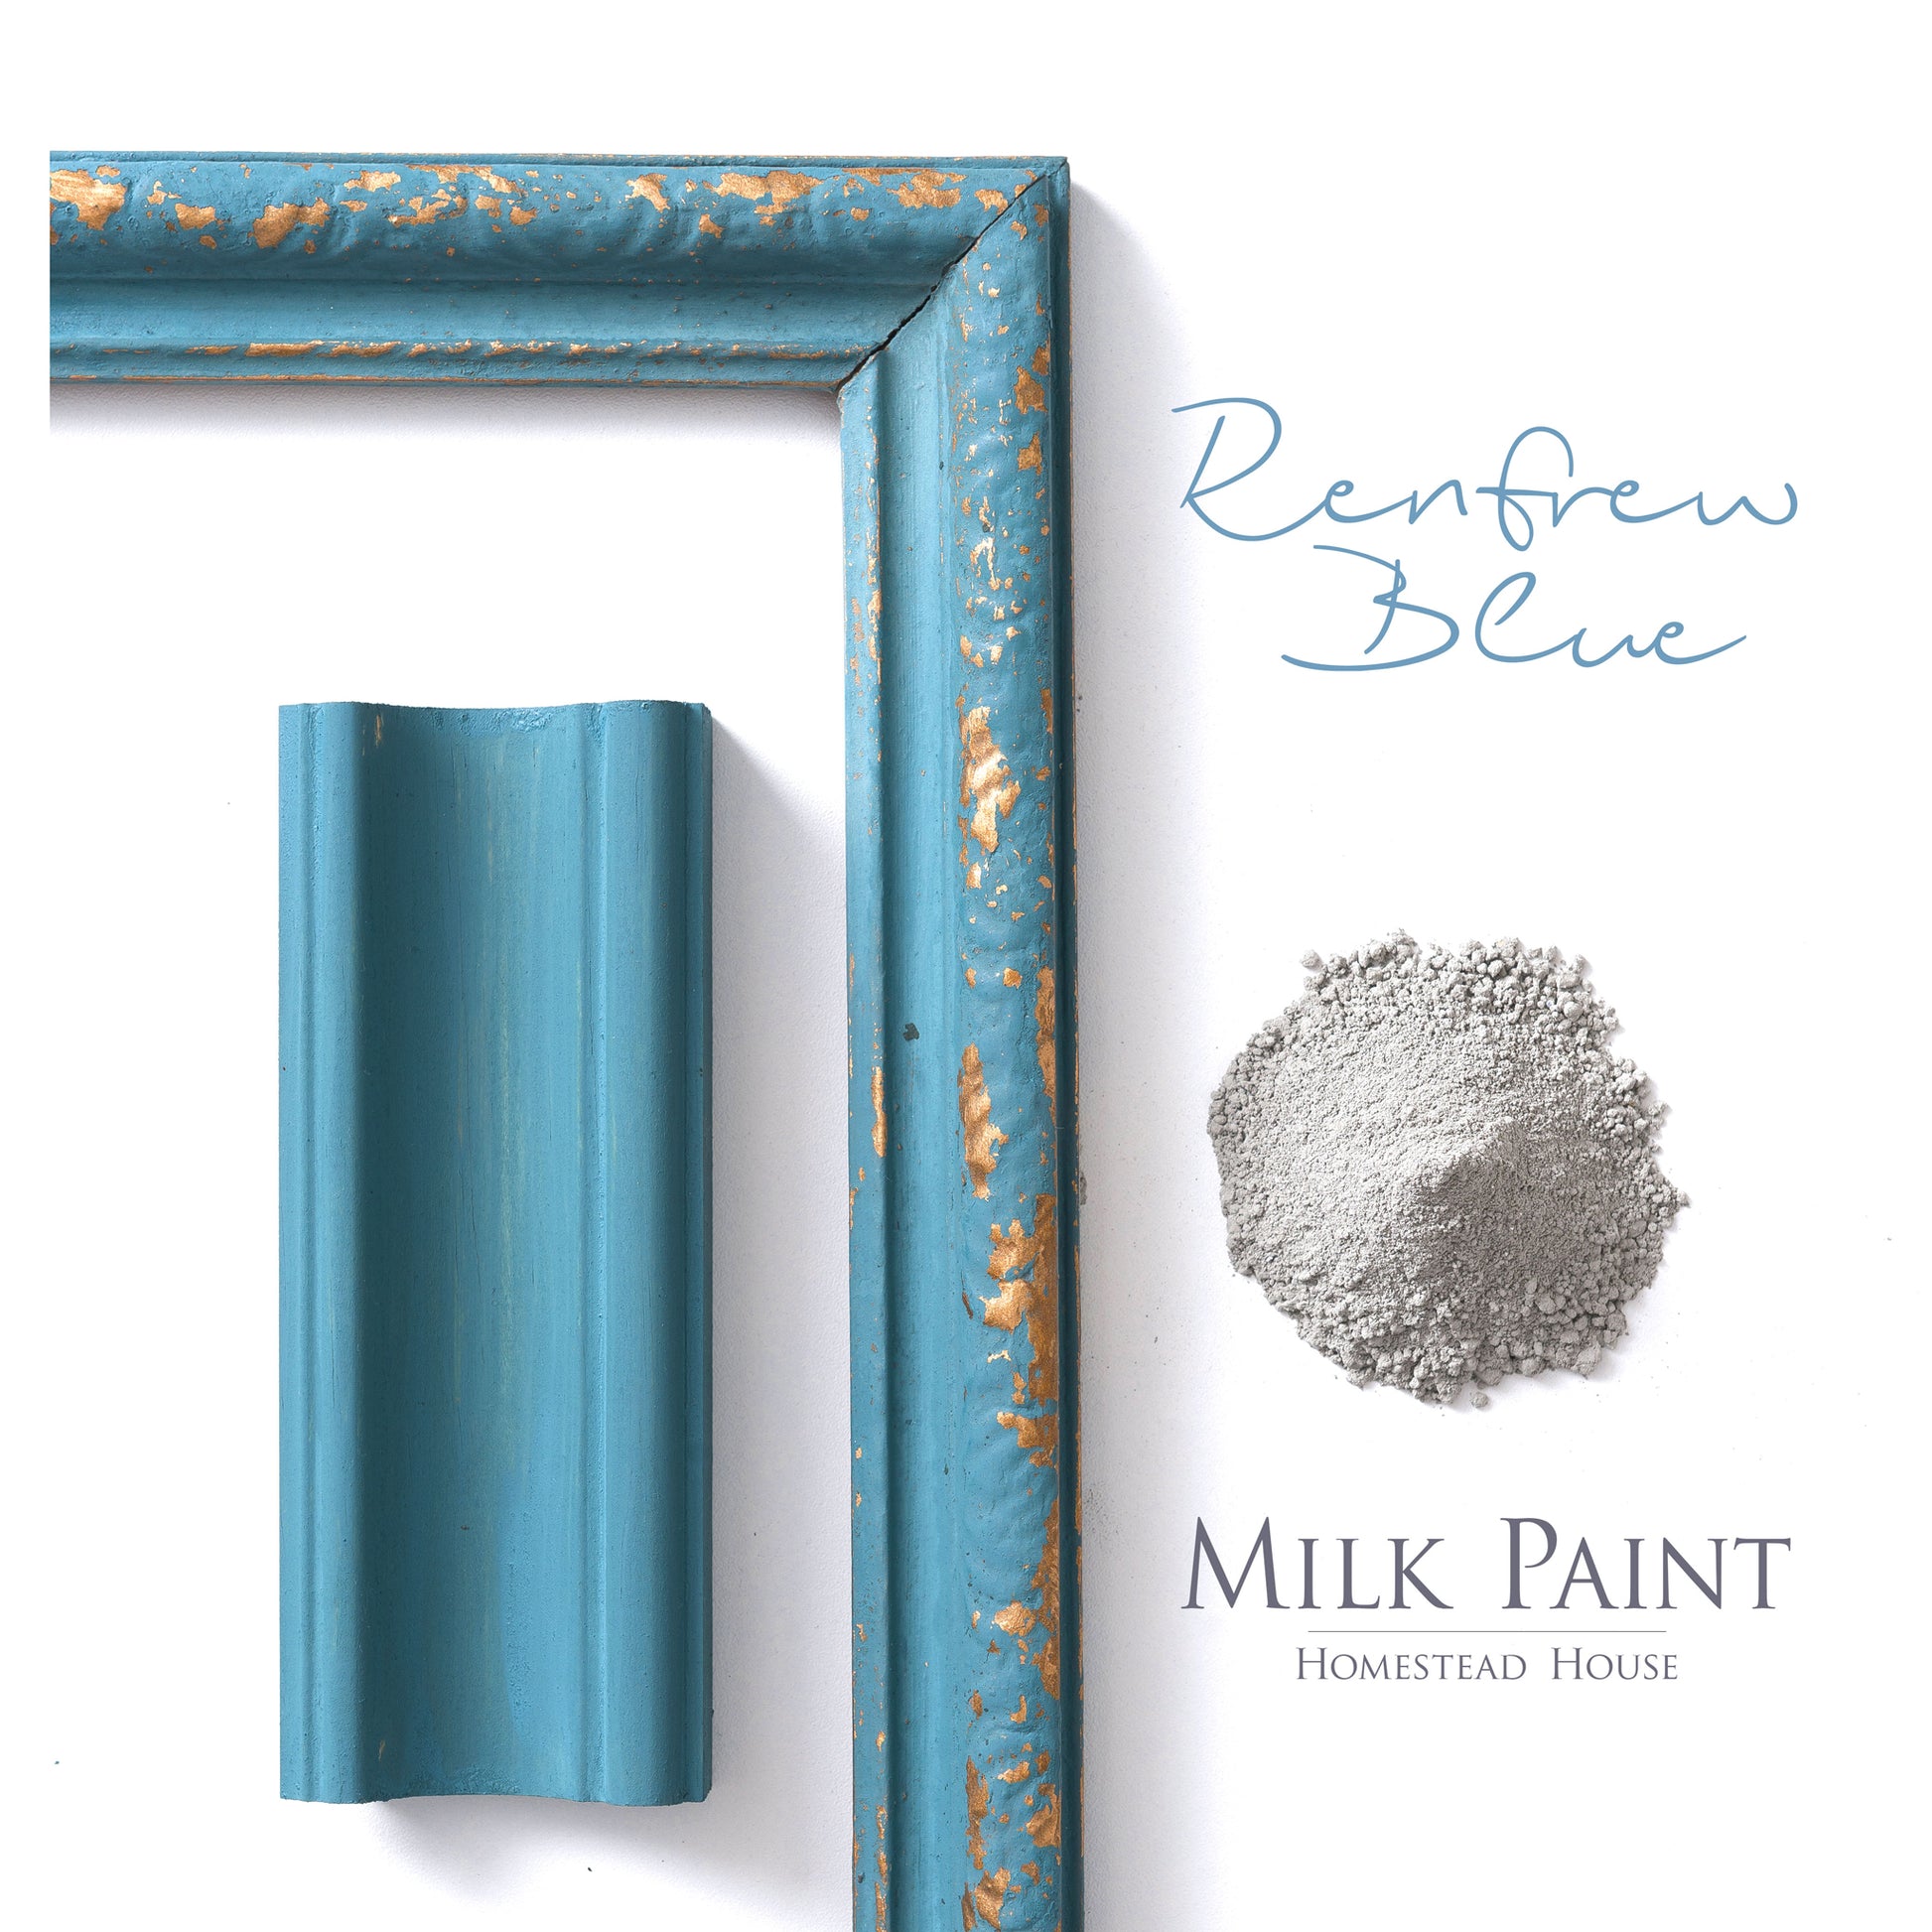 Milk Paint from Homestead House in Renfrew Blue, A muted dark turquoise blue.  |  homesteadhouse.ca